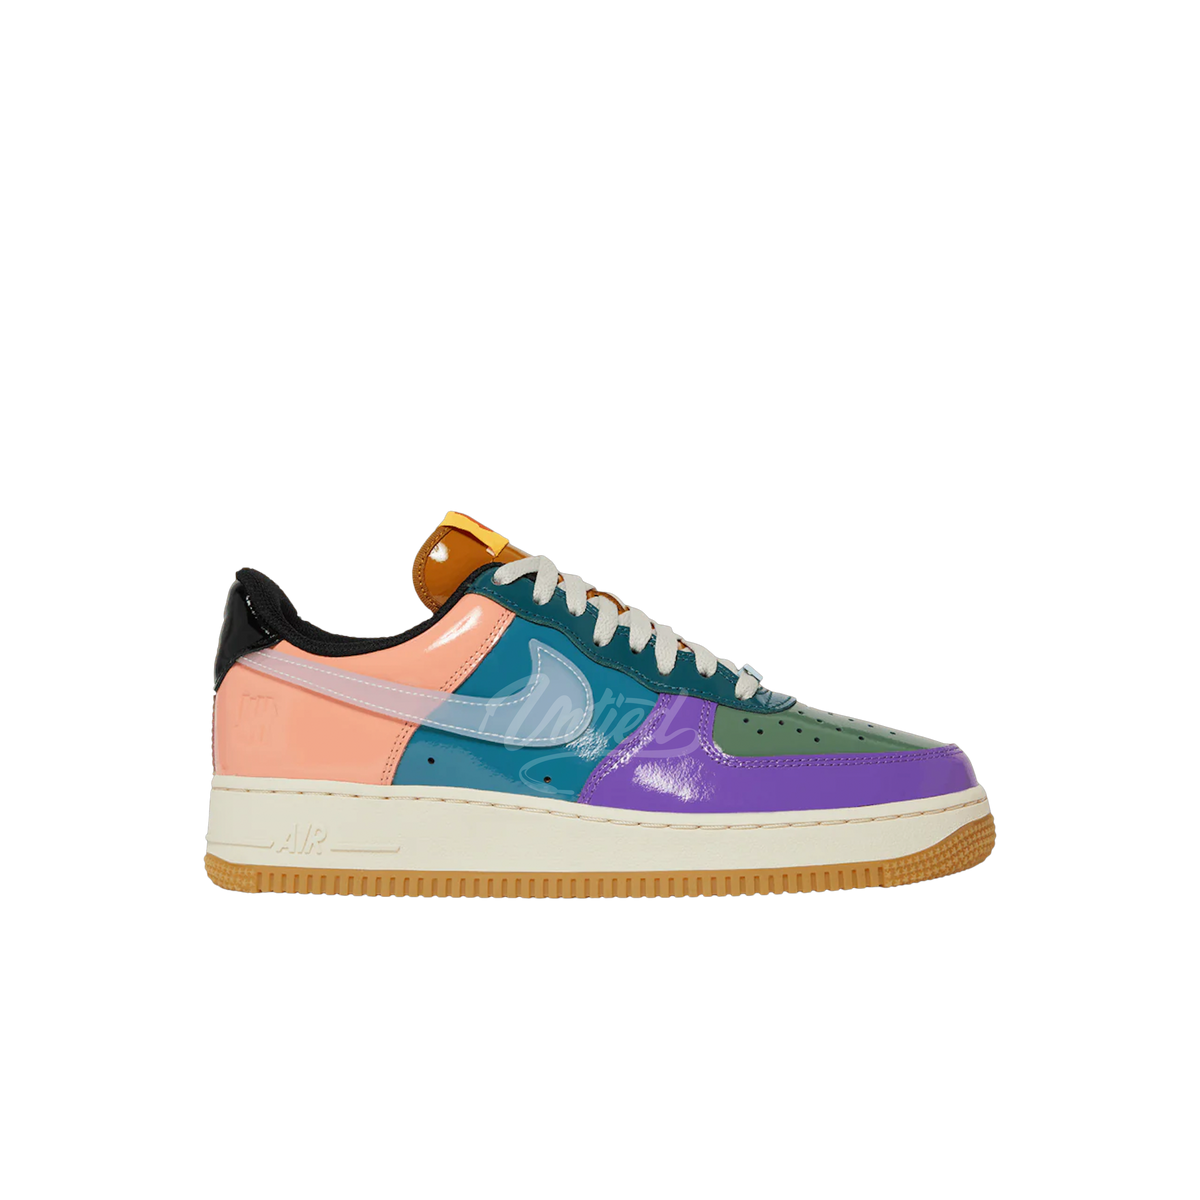 Air Force 1 "Undefeated Multi-Patent Wild Berry"